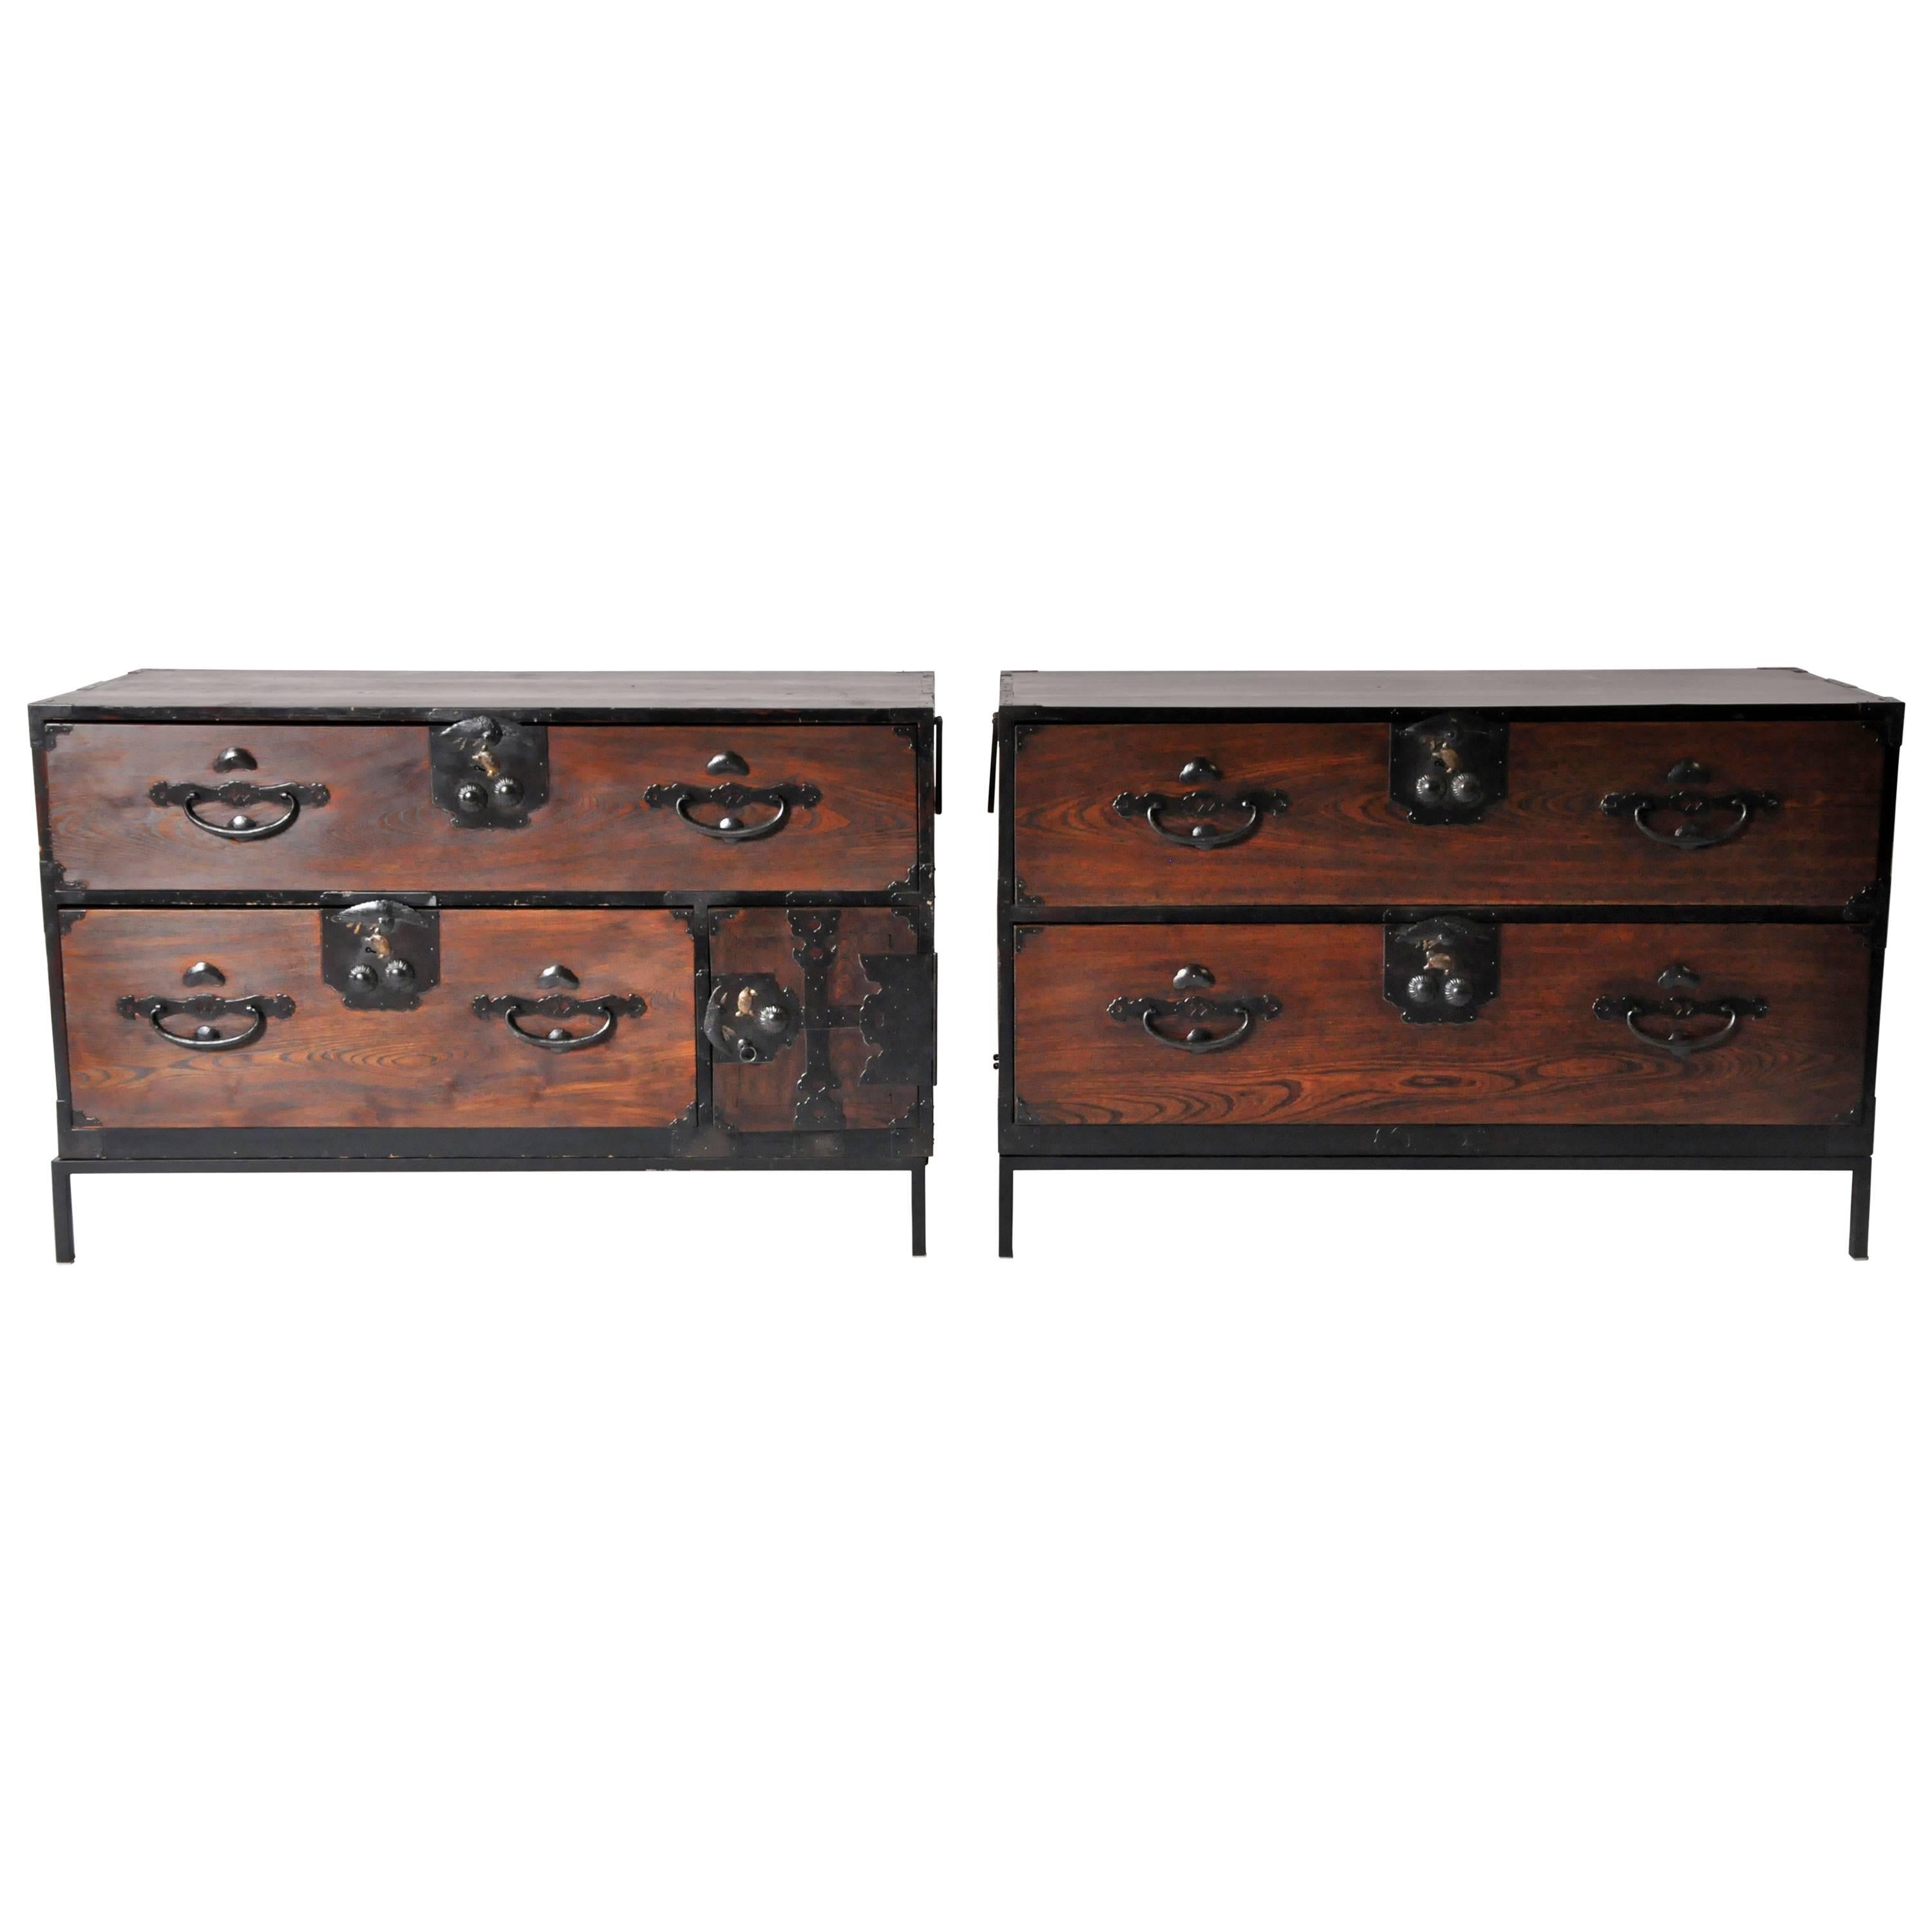 Pair of Tansu Chests on Iron Bases